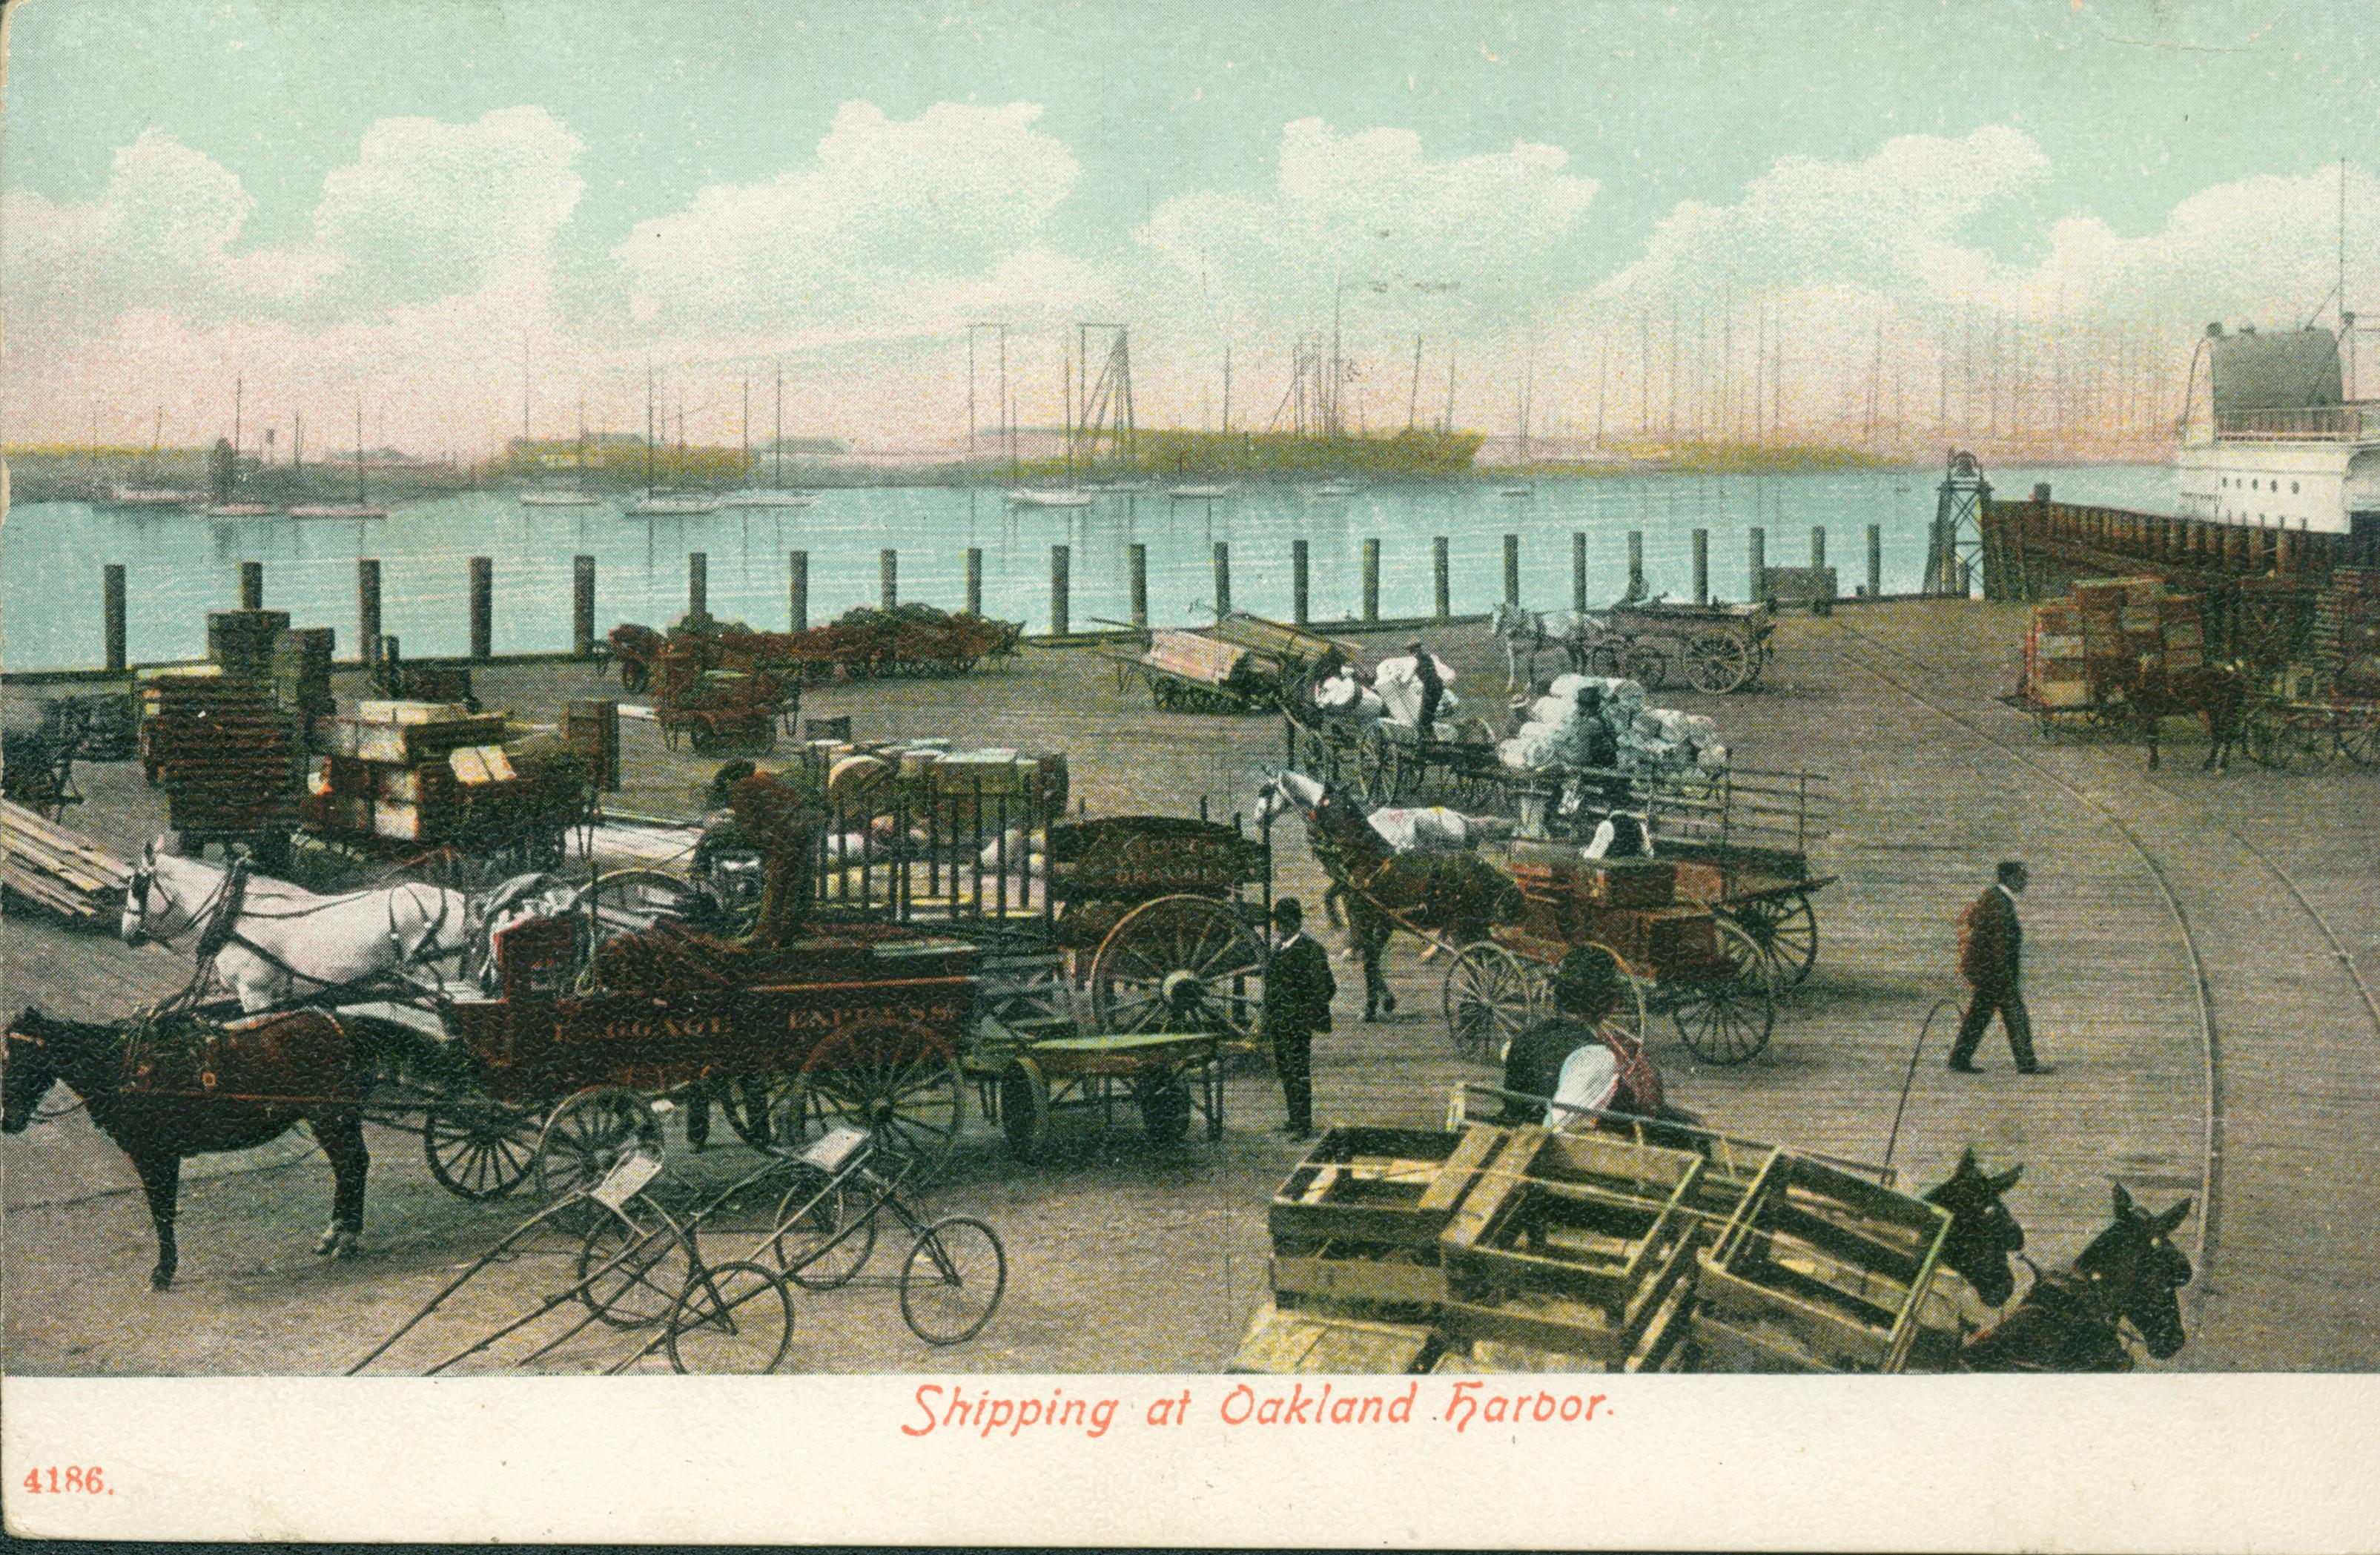 Shows several carts and wagons waiting at the dock with ships in the background